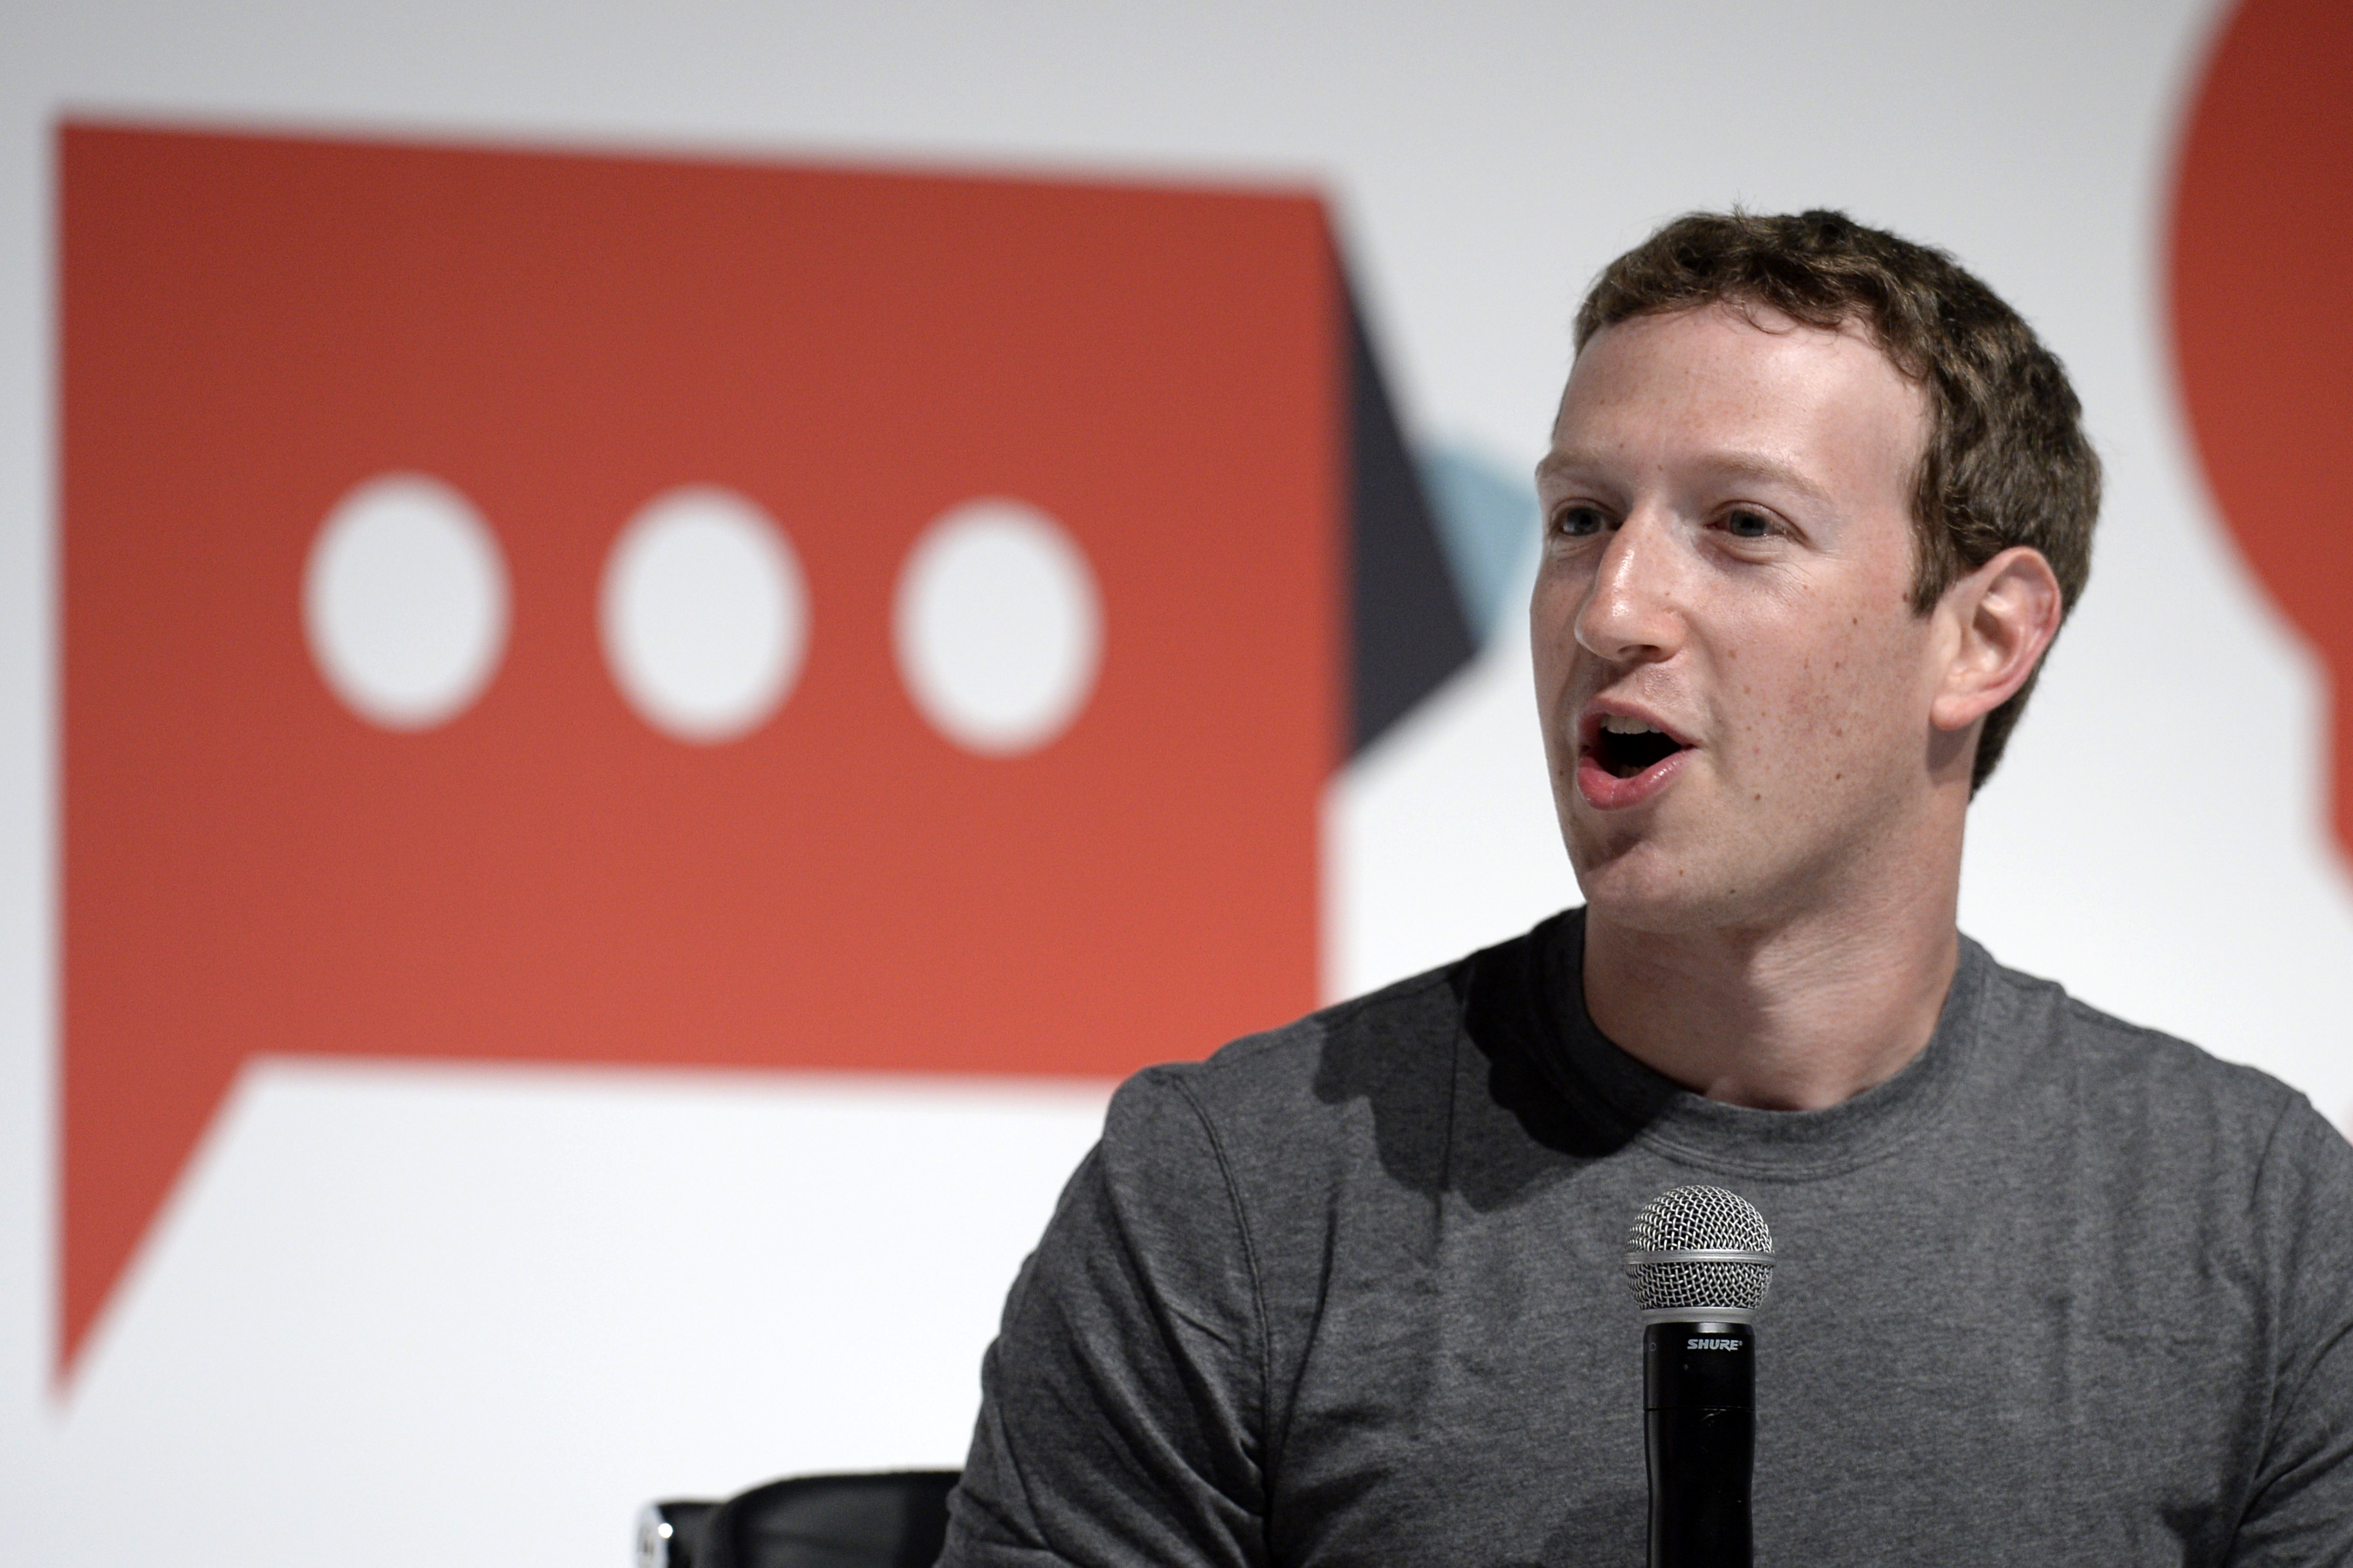 (FILES) This file photo taken on March 2, 2015 shows Facebook's creator Mark Zuckerberg speaks on the opening day of the 2015 Mobile World Congress (MWC) in Barcelona. The State prosecutor's office in Munich has initiated an investigation against Facebook's managers for causing incitement of the people according to Der Spiegel magazine on November 4, 2016 in advance from its new issue. / AFP PHOTO / LLUIS GENE